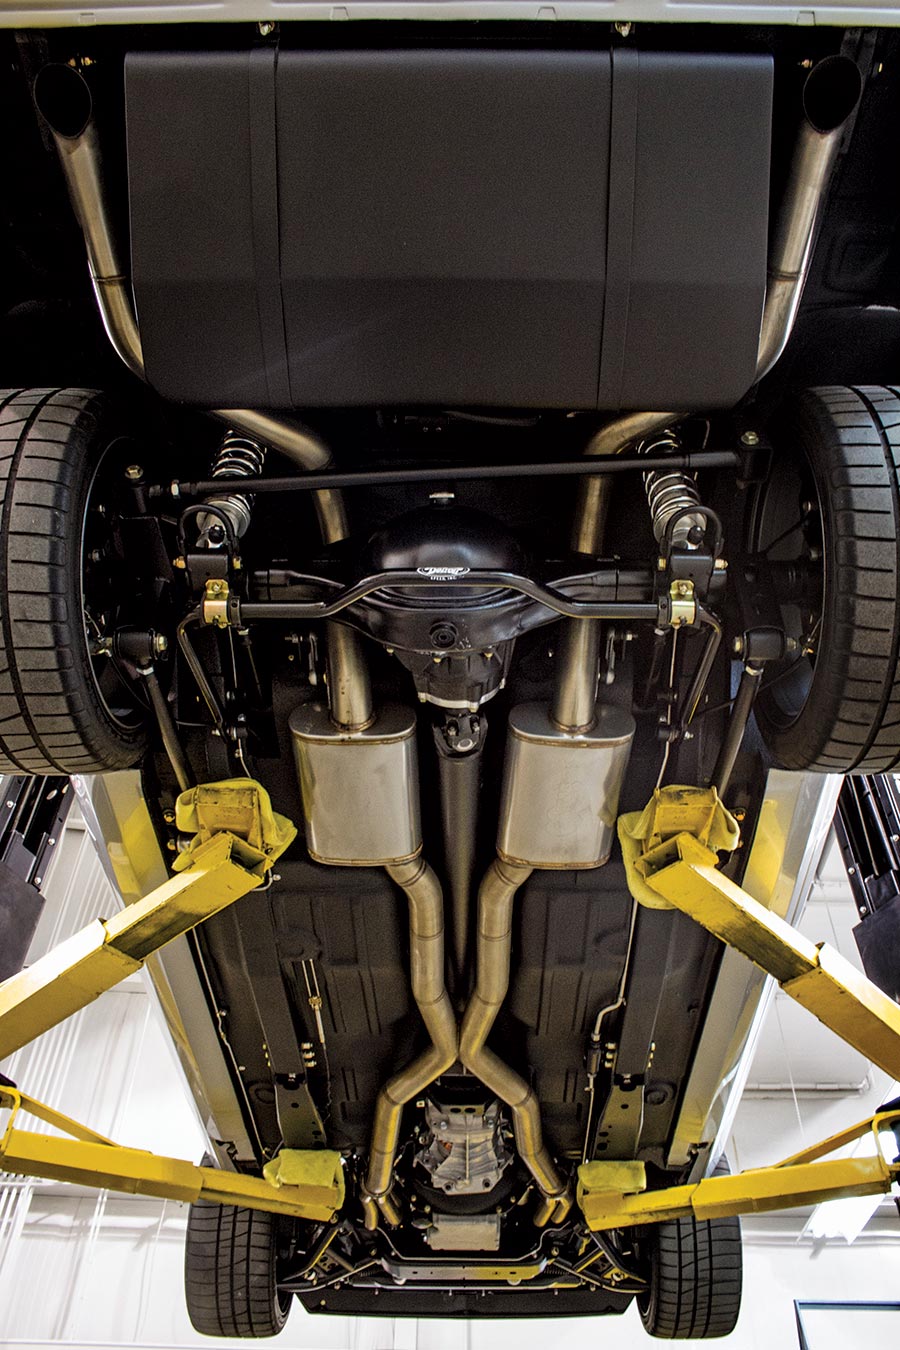 Picture of a rear suspension